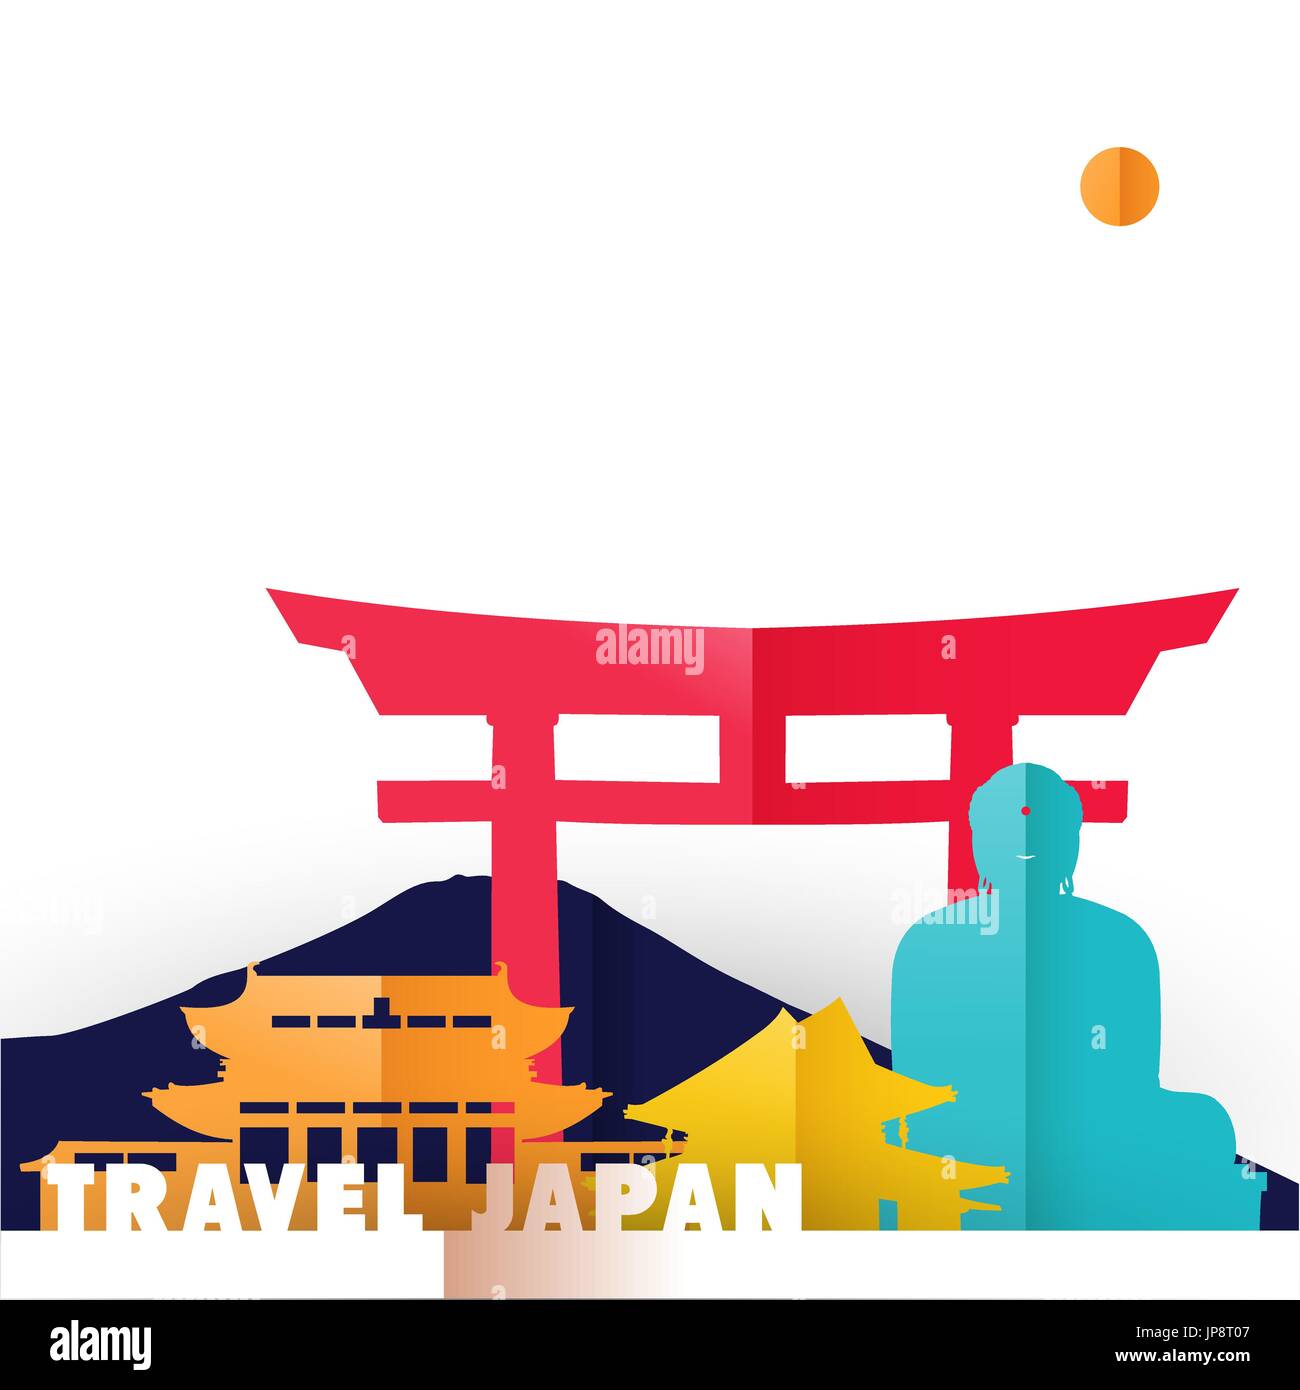 Travel Japan concept illustration in paper cut style, famous world landmarks of Japanese country. Includes Buddha statue, Mount Fuji, ancient temples. Stock Vector